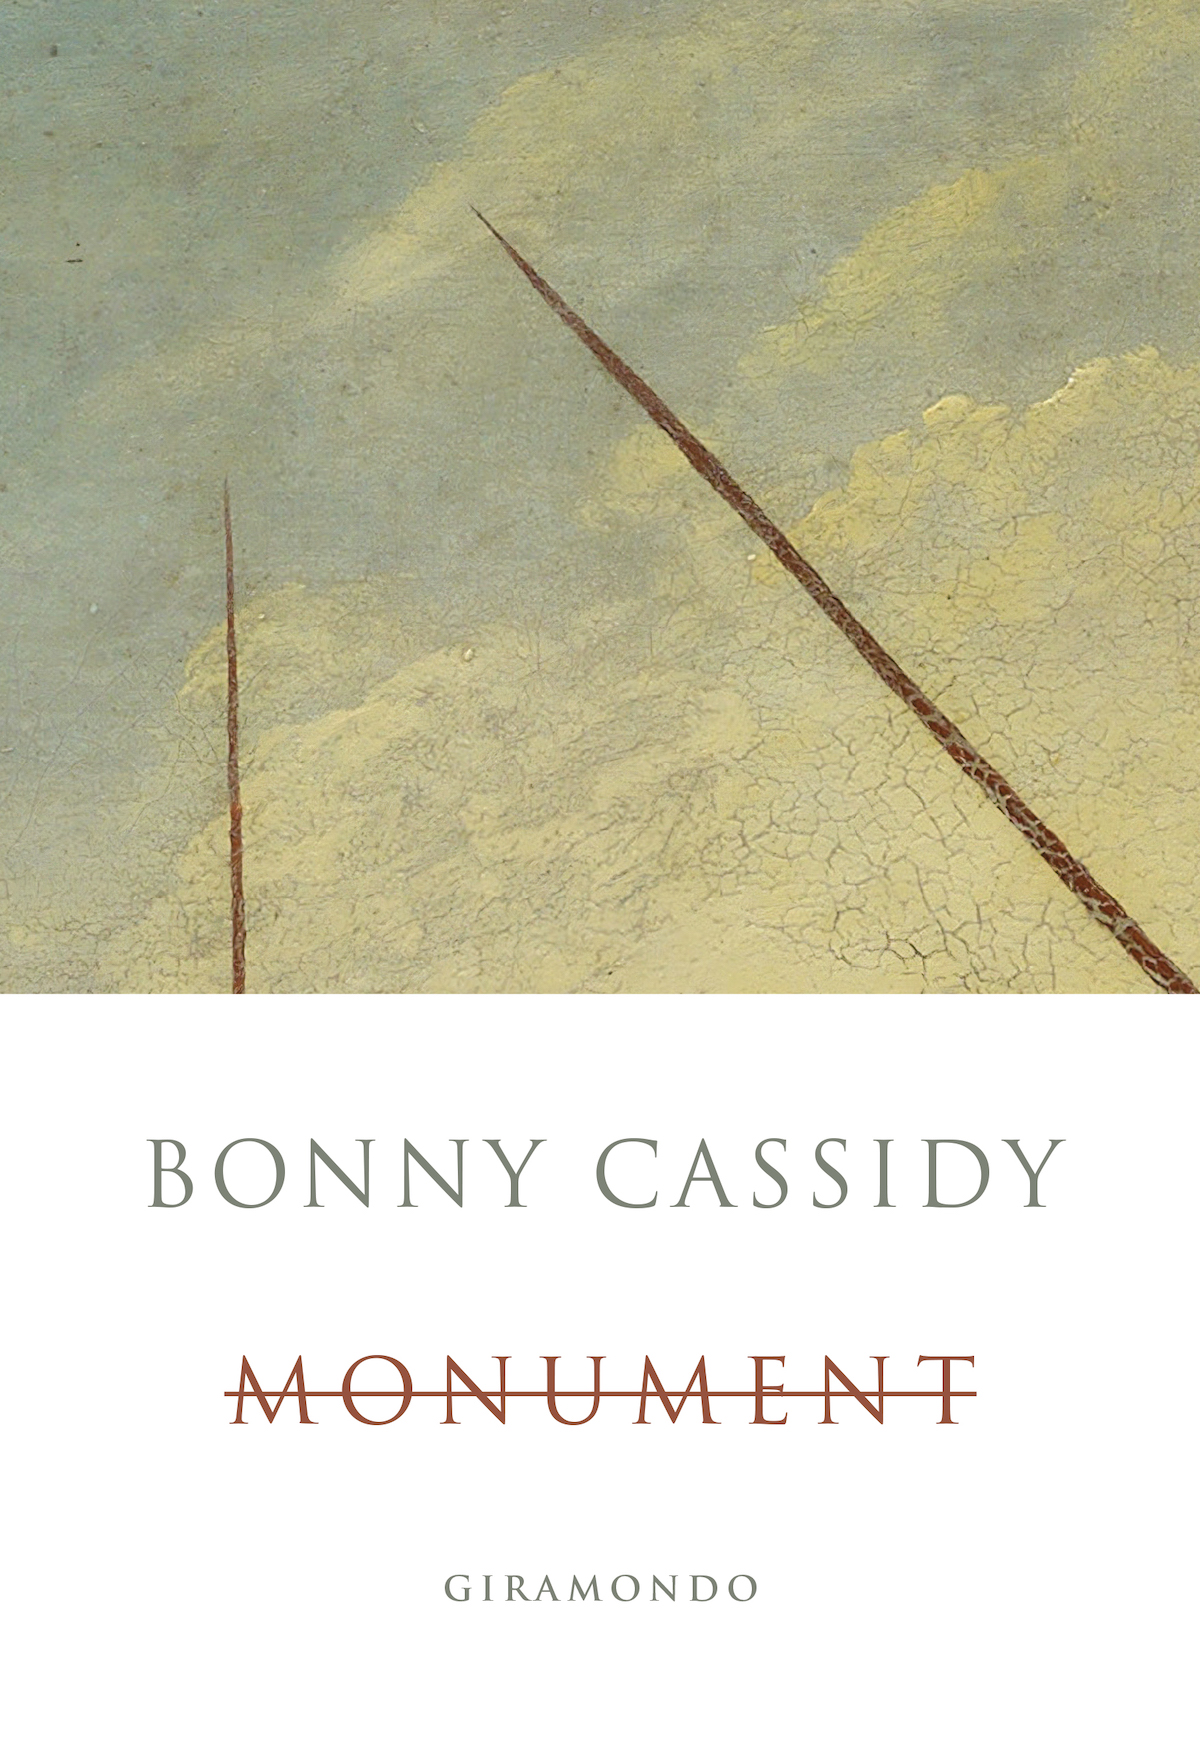 A book cover showing a painting of a glowing, cloudy sky with two tall, thin poles extending upwards